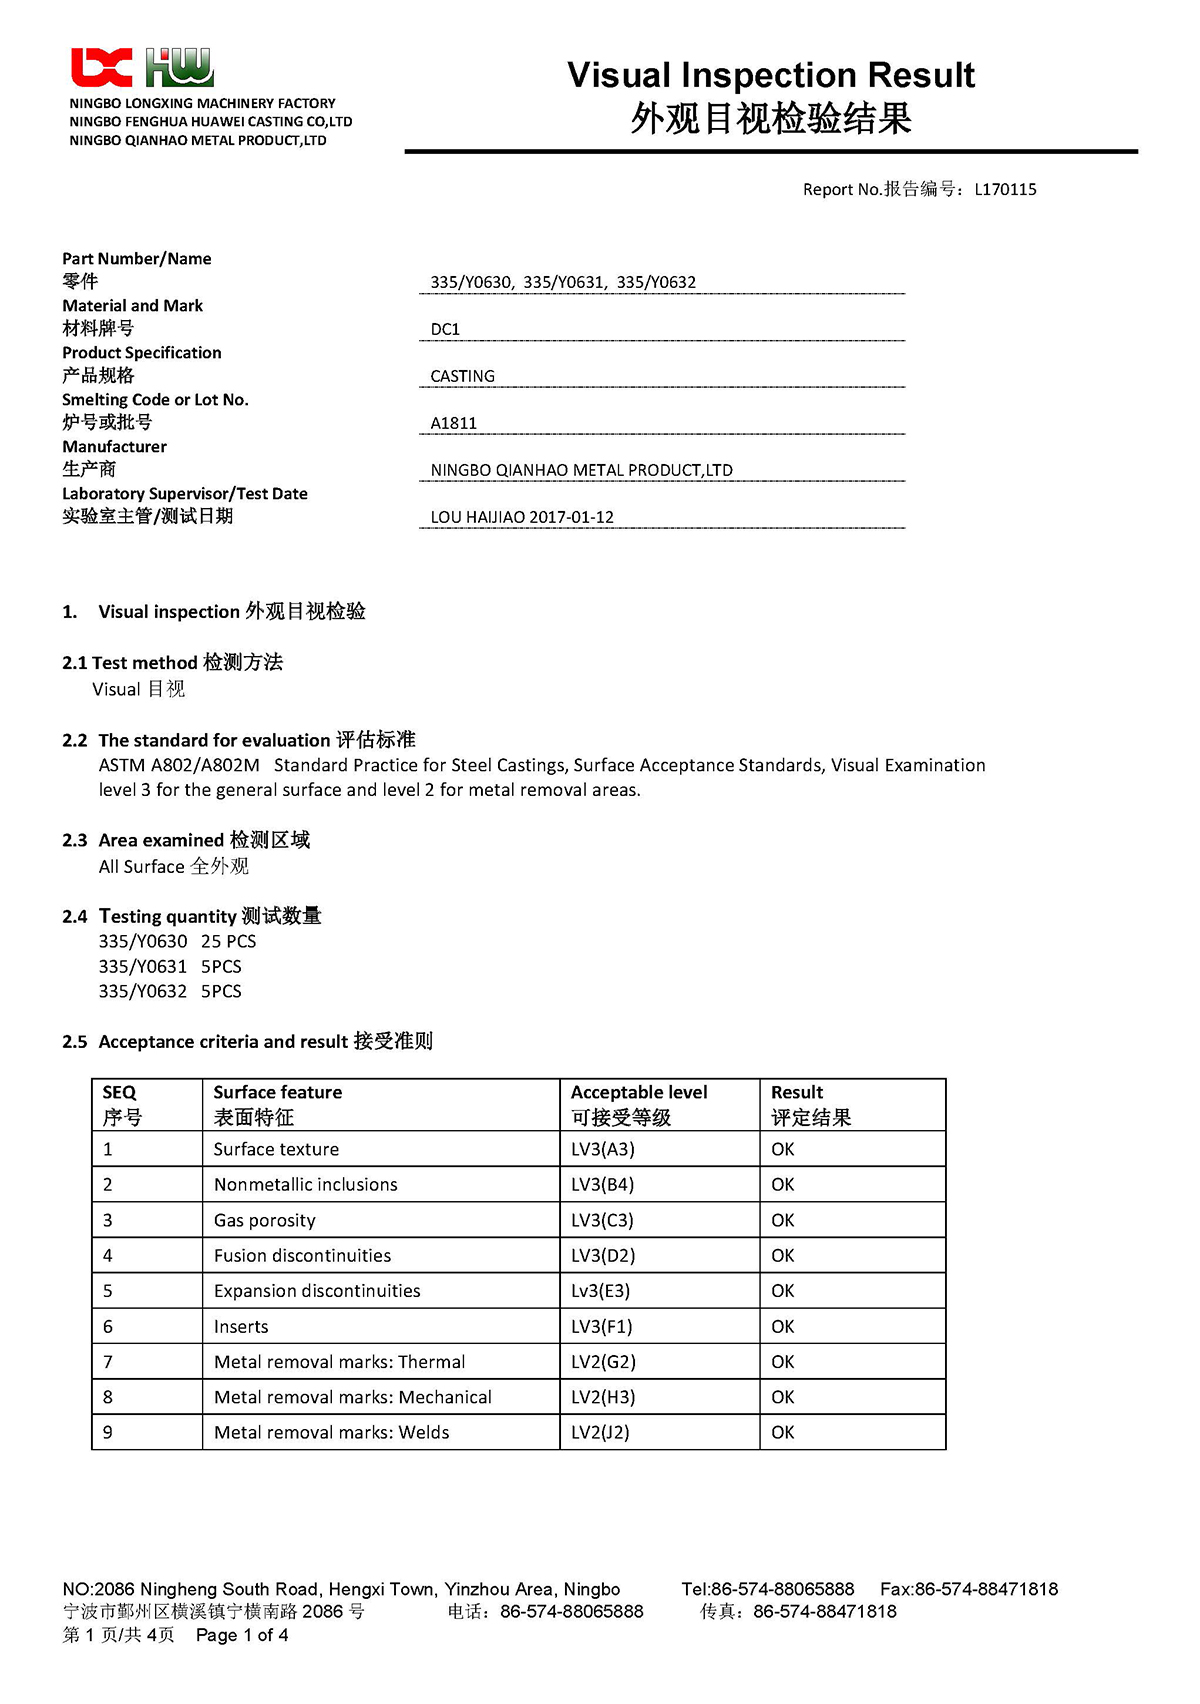 Visual Inspection Report(图1)